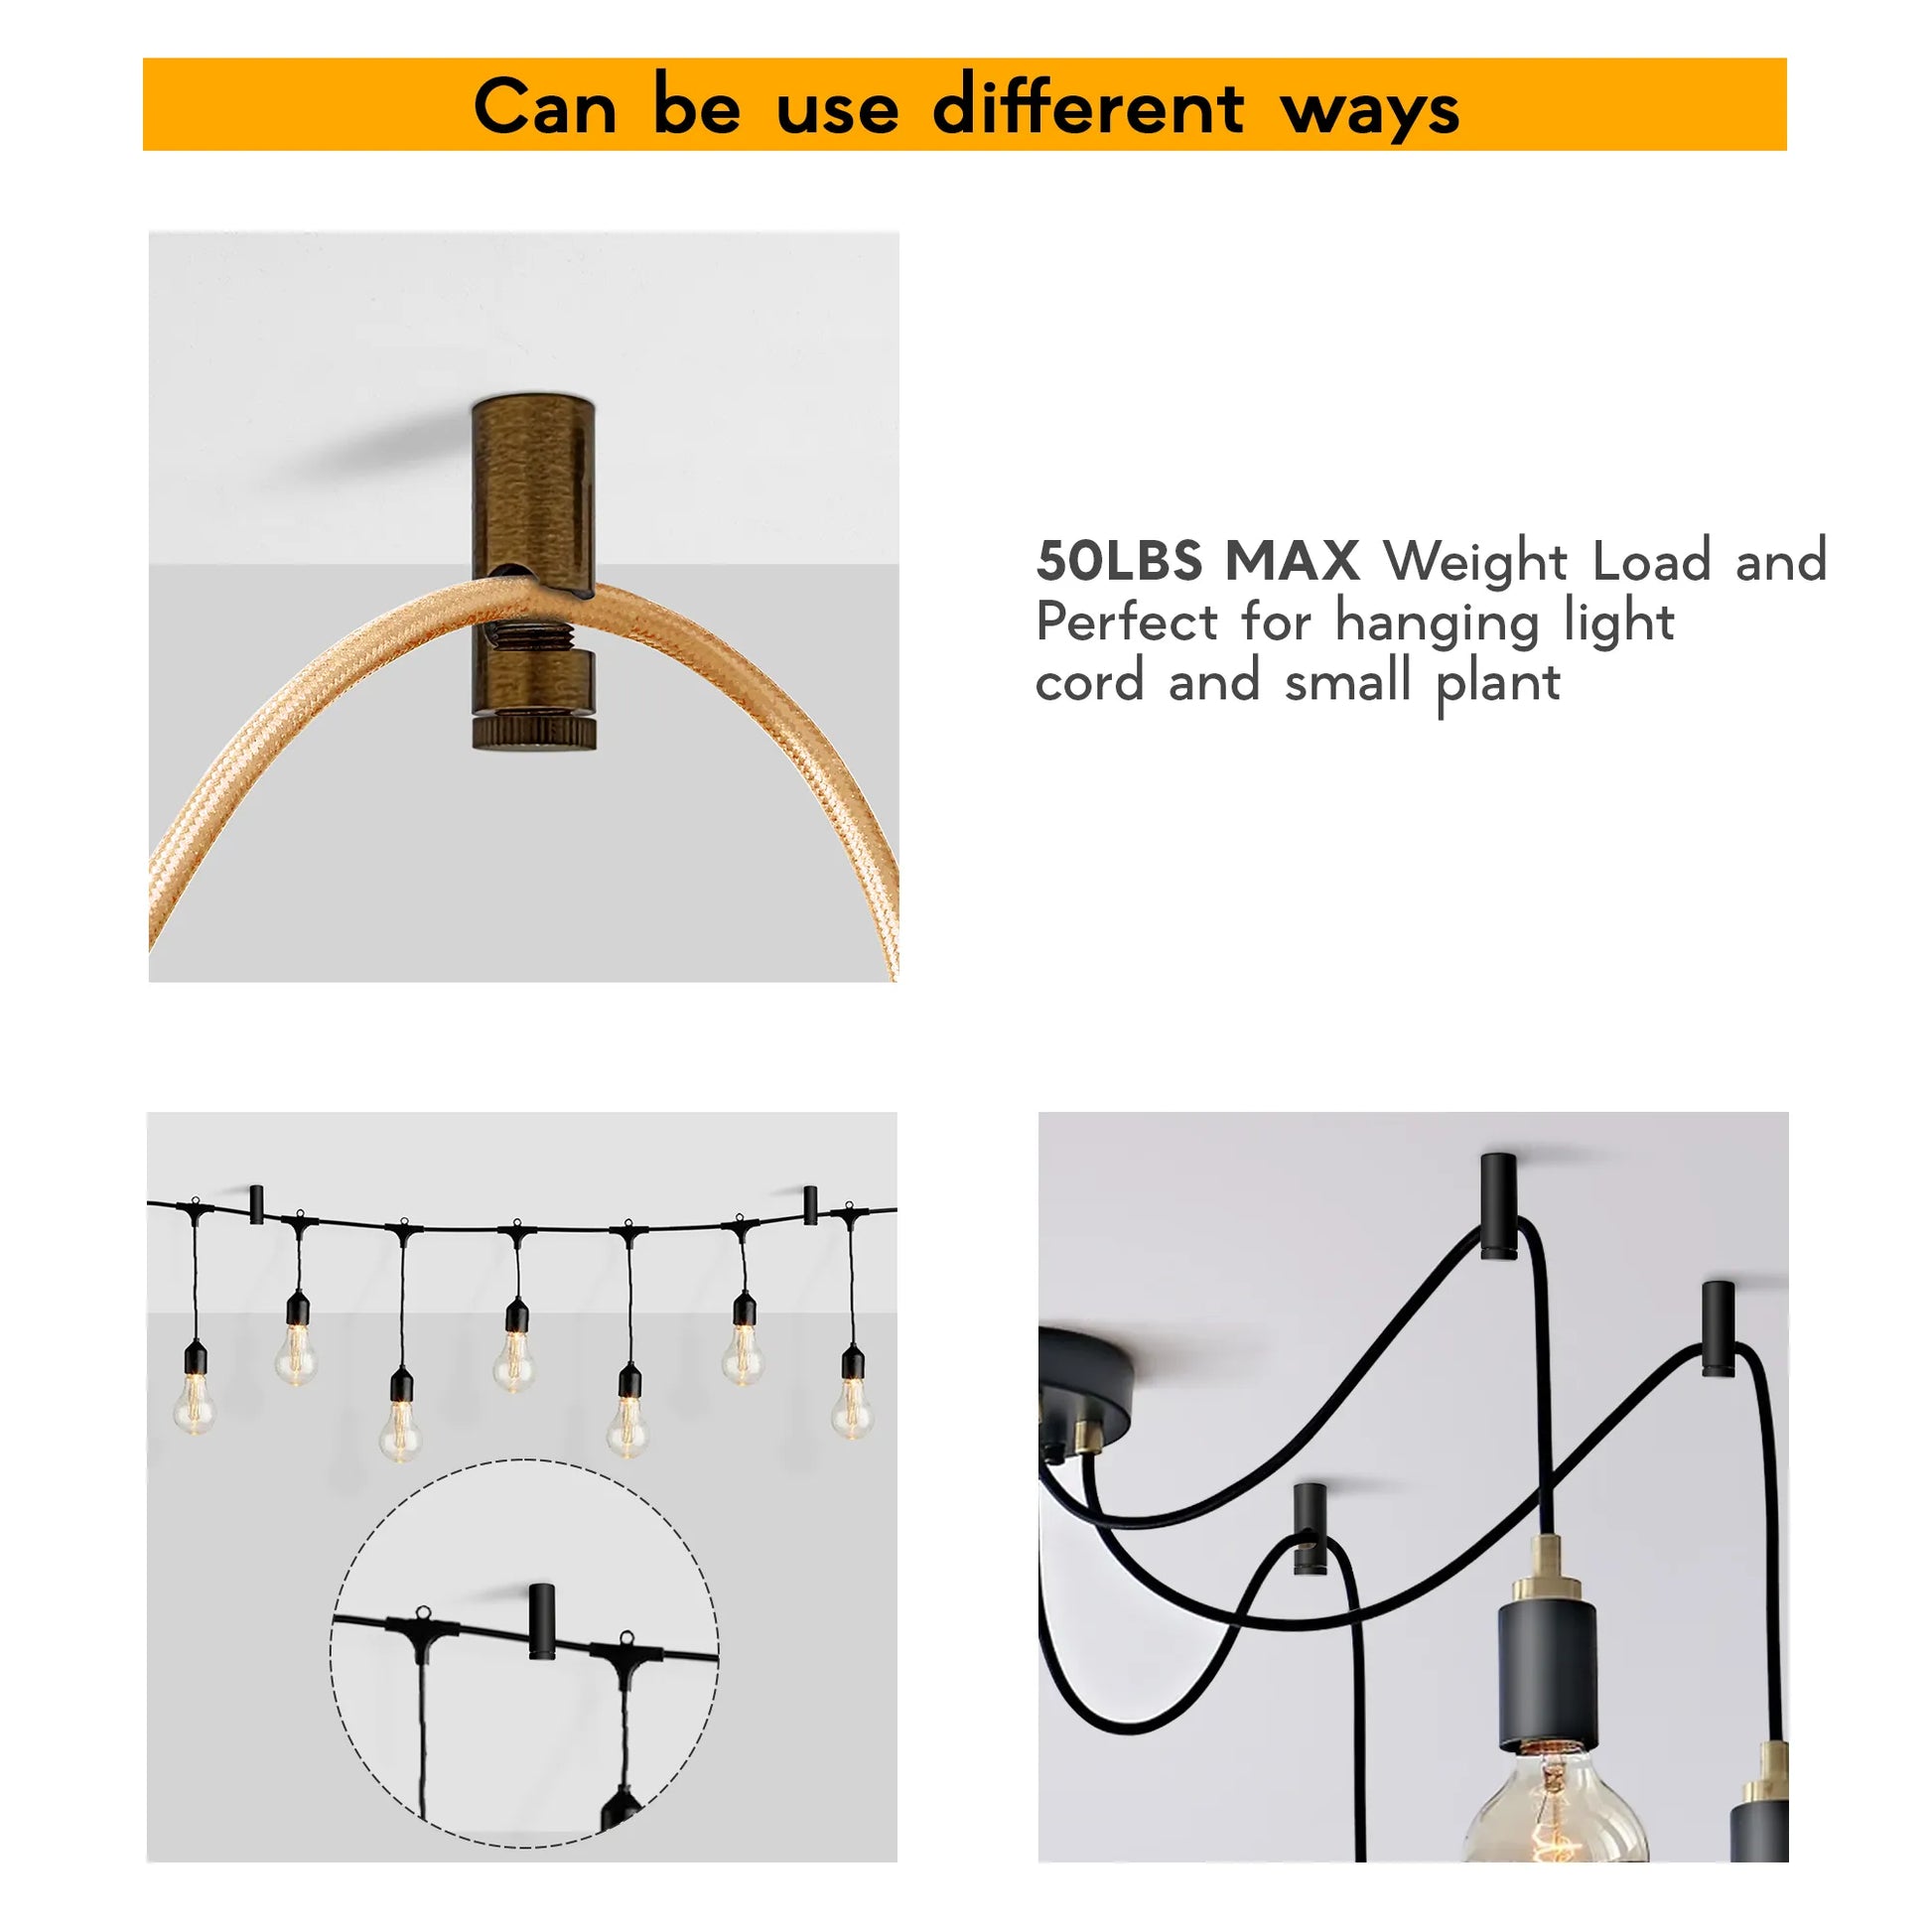 Cable hook - Installations ways